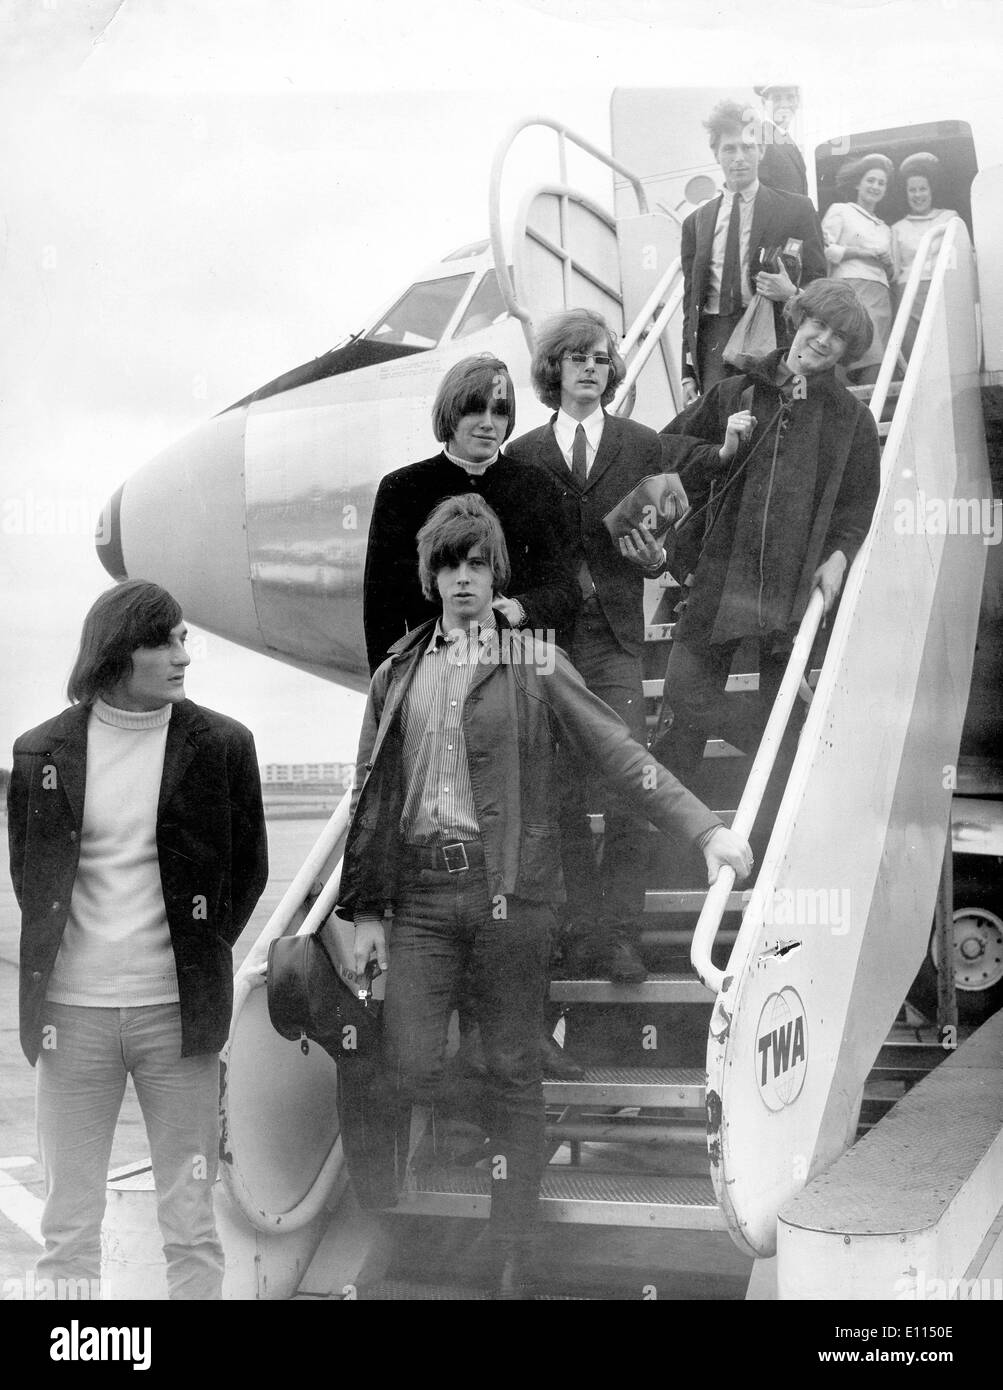 Rock Band The Byrds ankommen in London Stockfoto